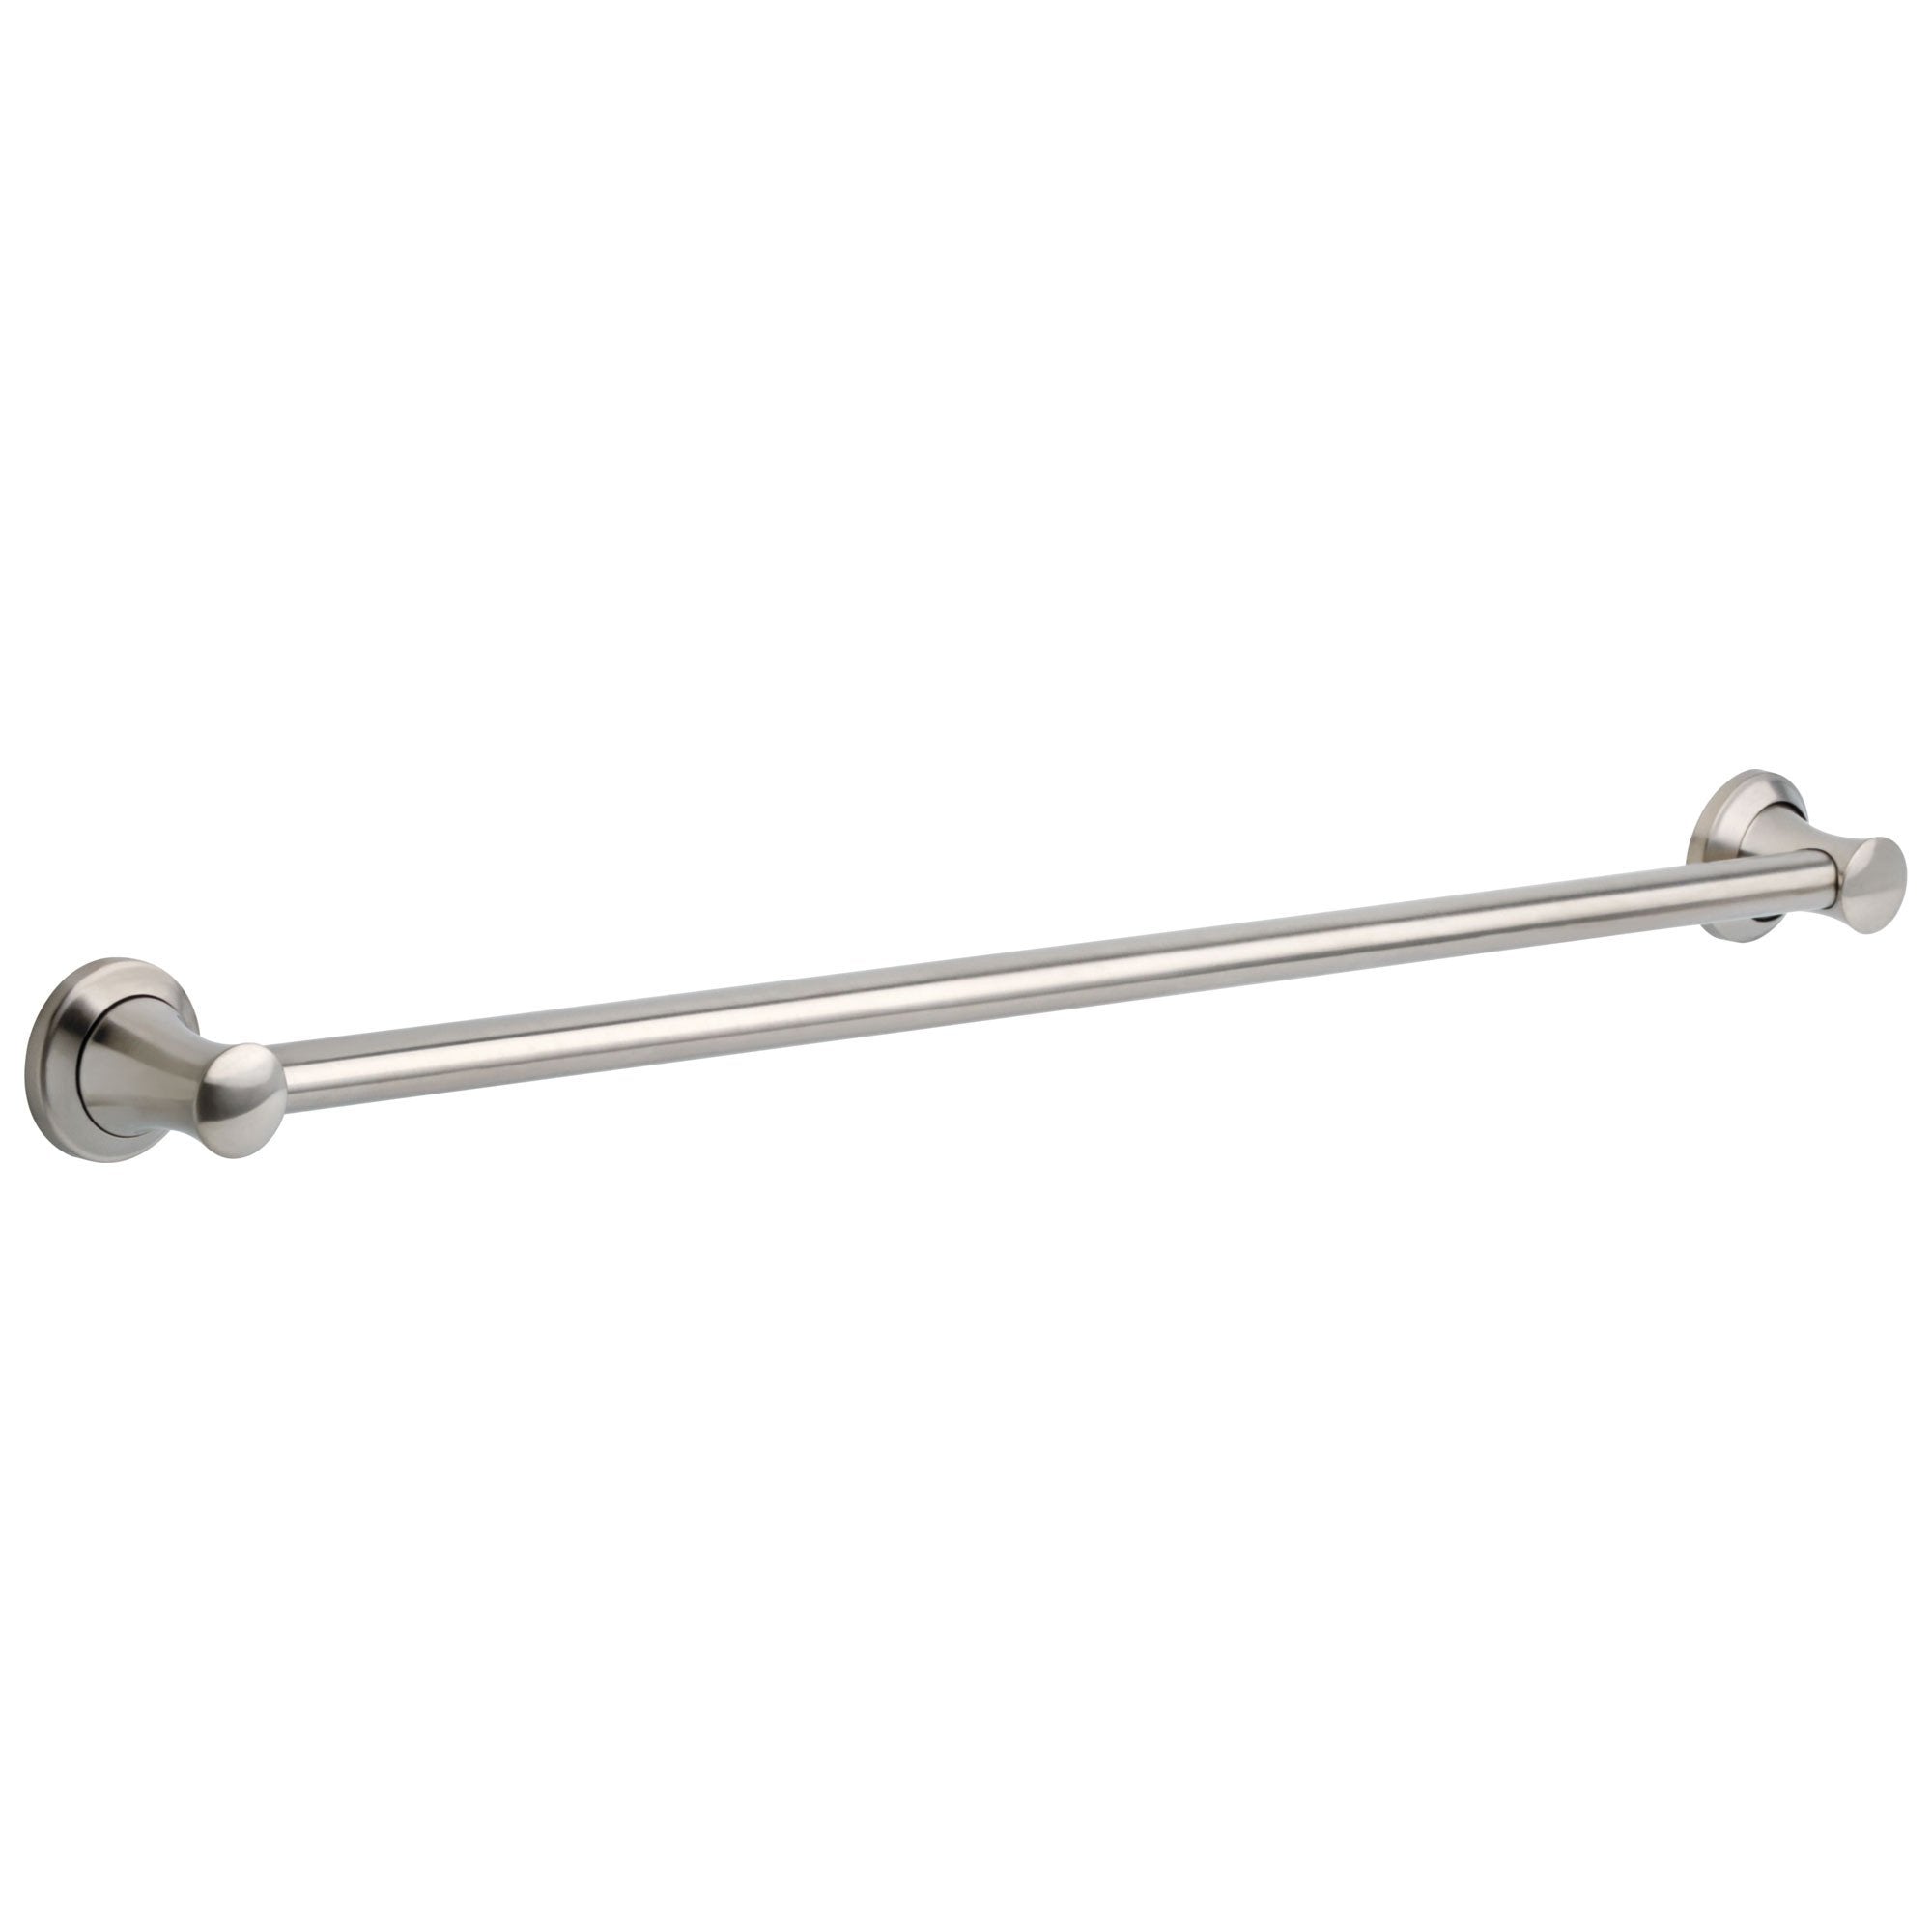 Delta Bath Safety Collection Stainless Steel Finish Transitional Style Decorative ADA Approved Bathroom or Shower Long 36" Grab Bar D41736SS